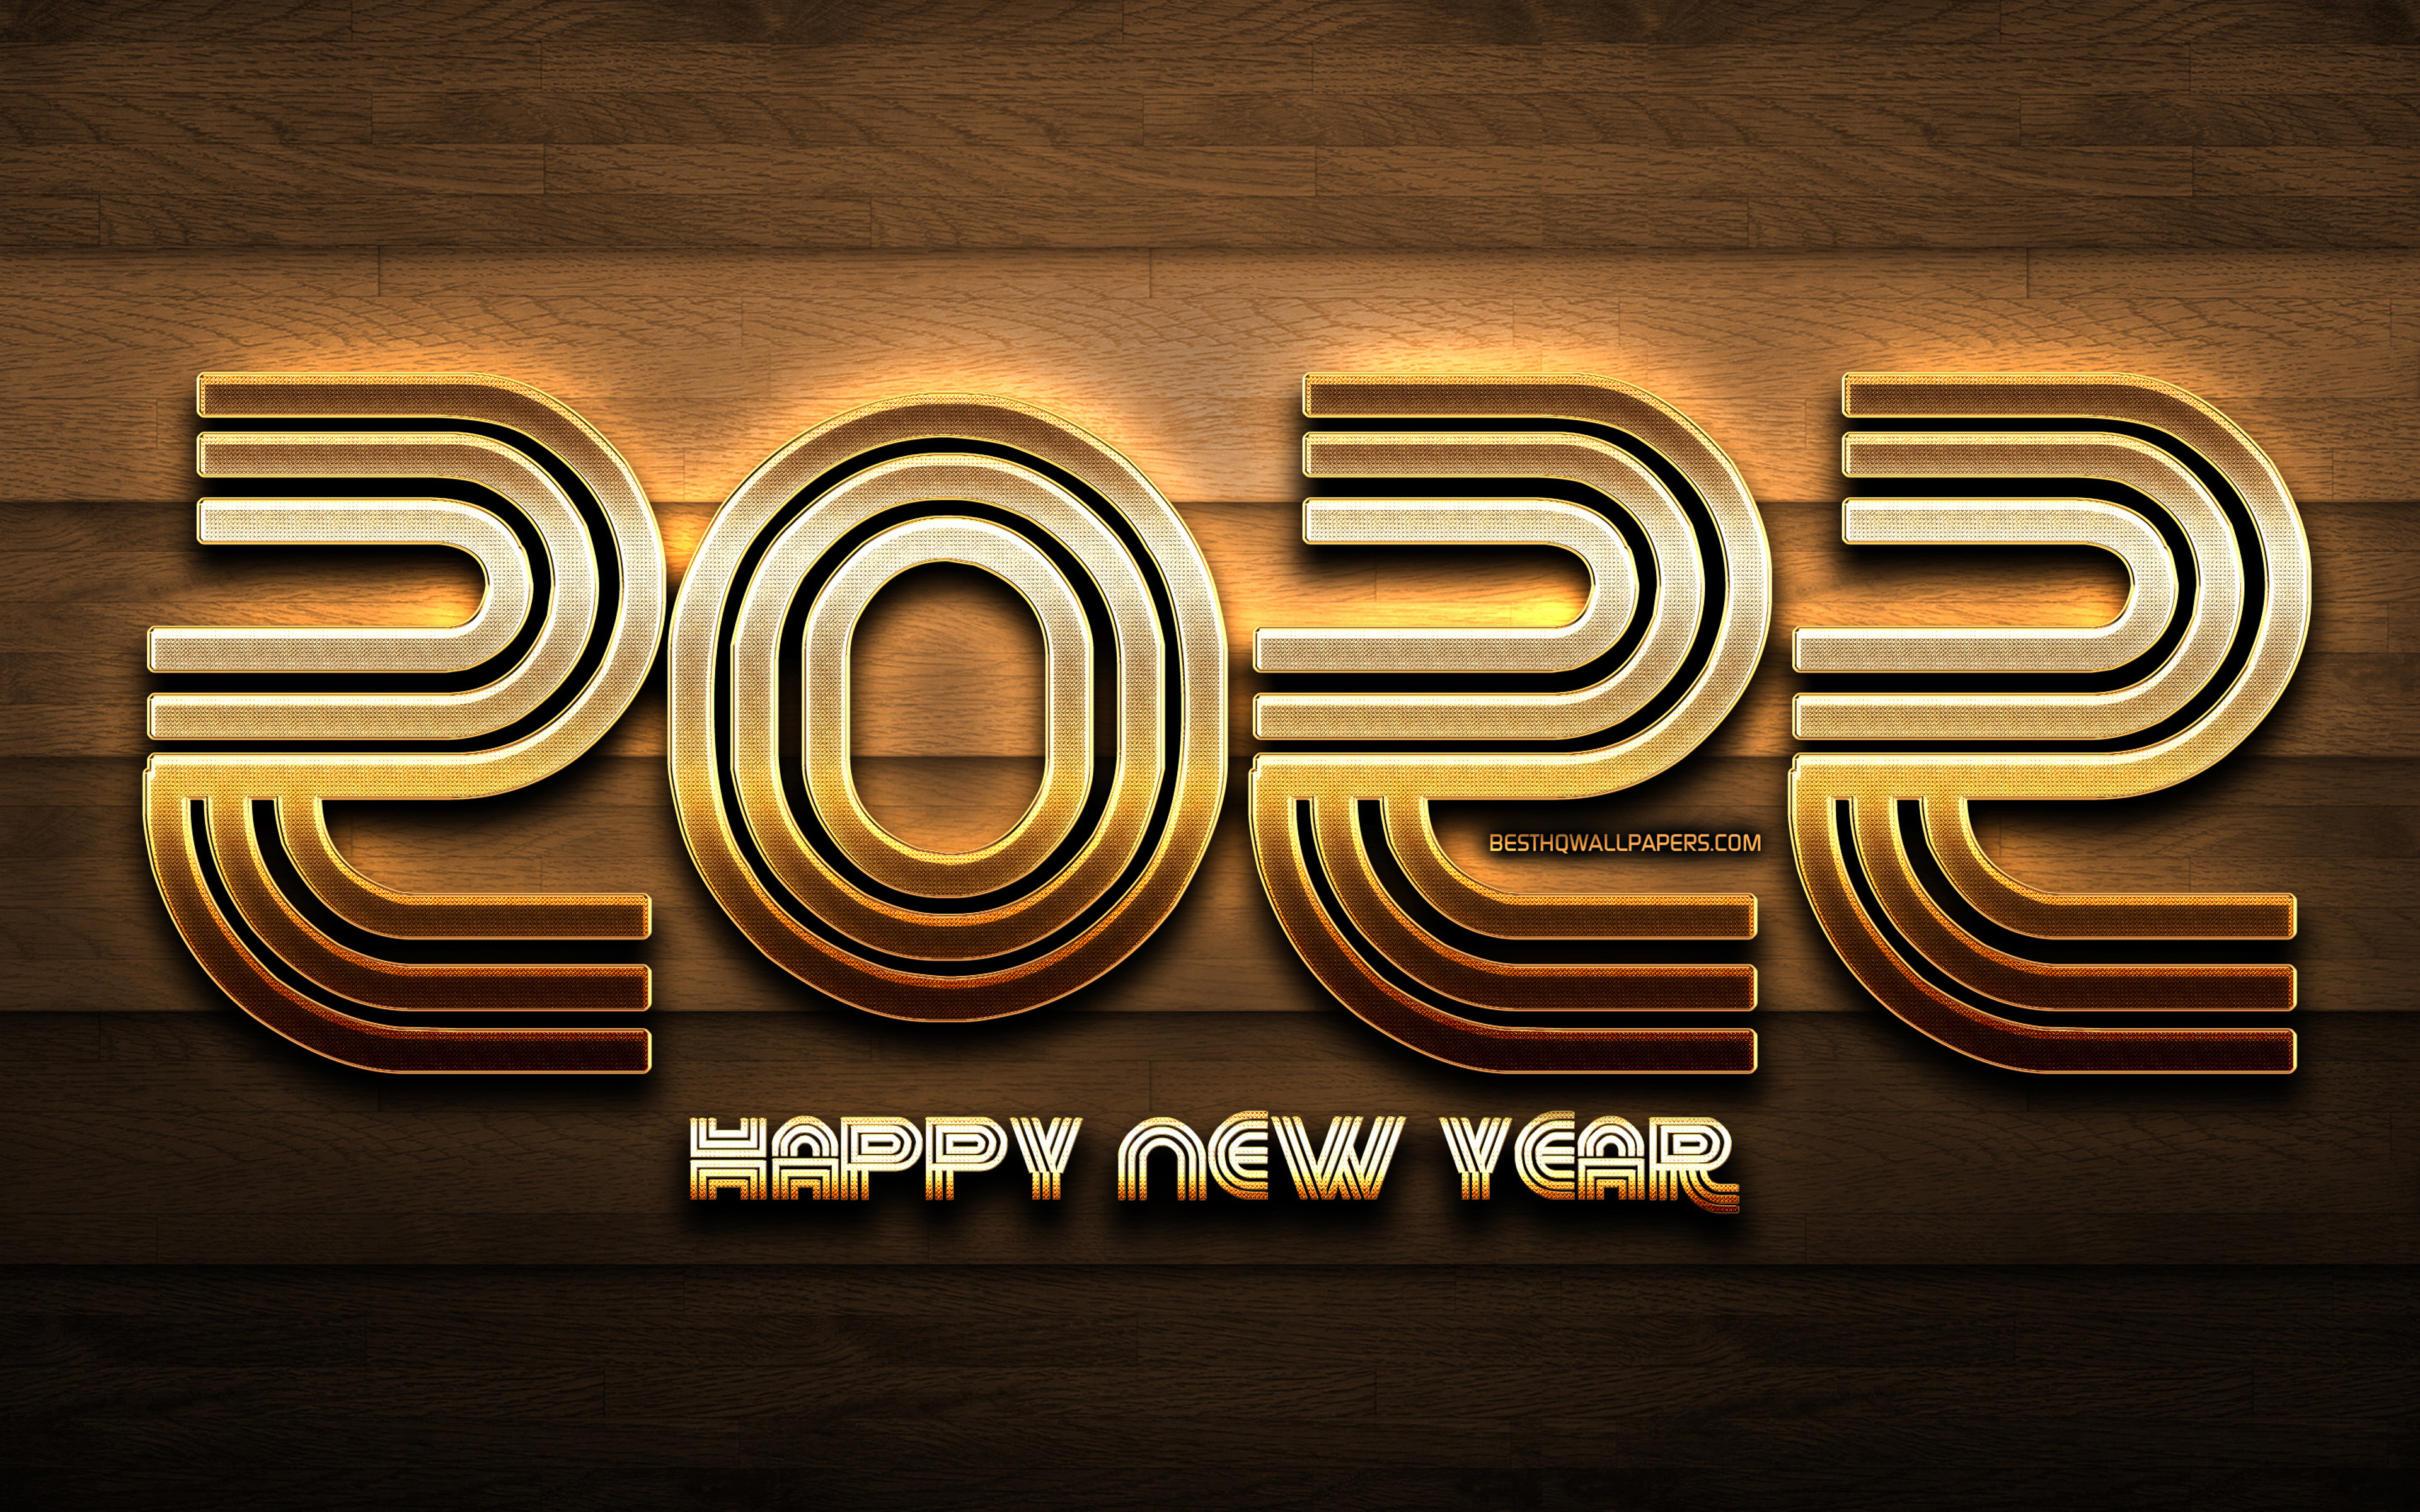 Wallpapers holiday with 2022 2022 on the desktop